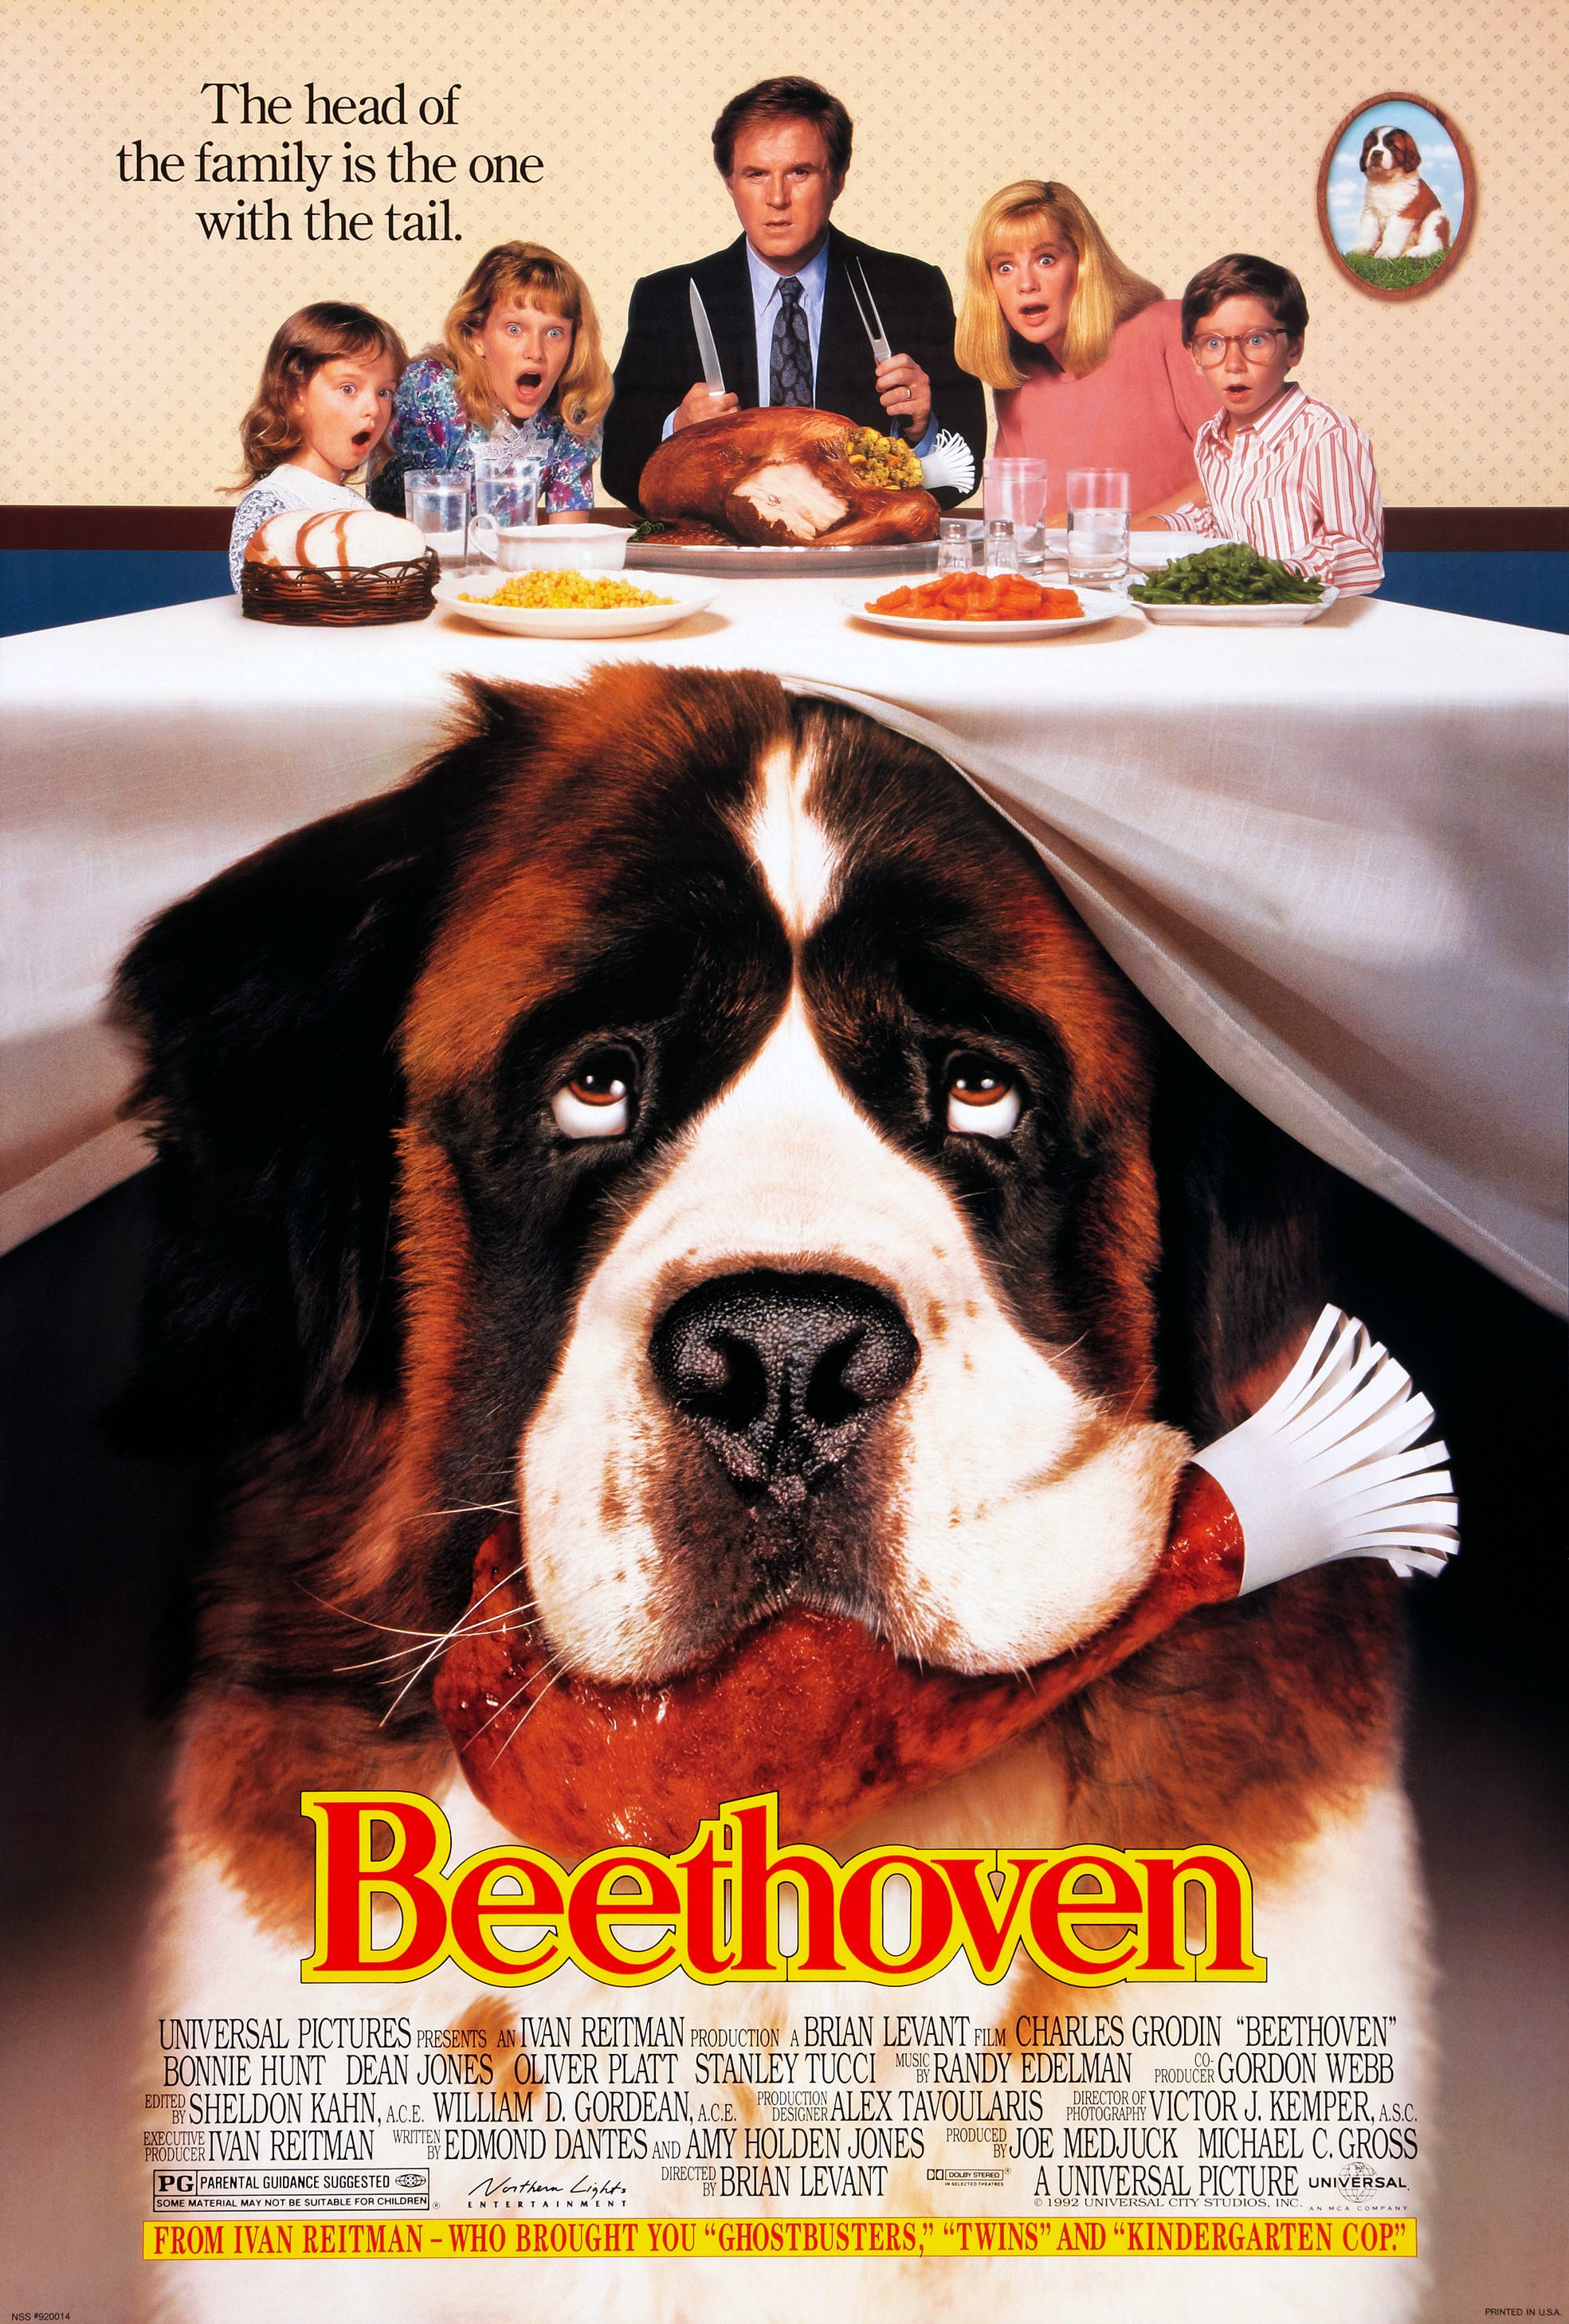 Beethoven movie poster shows close up of dog hiding under a table with family looking on above; title text in red font below